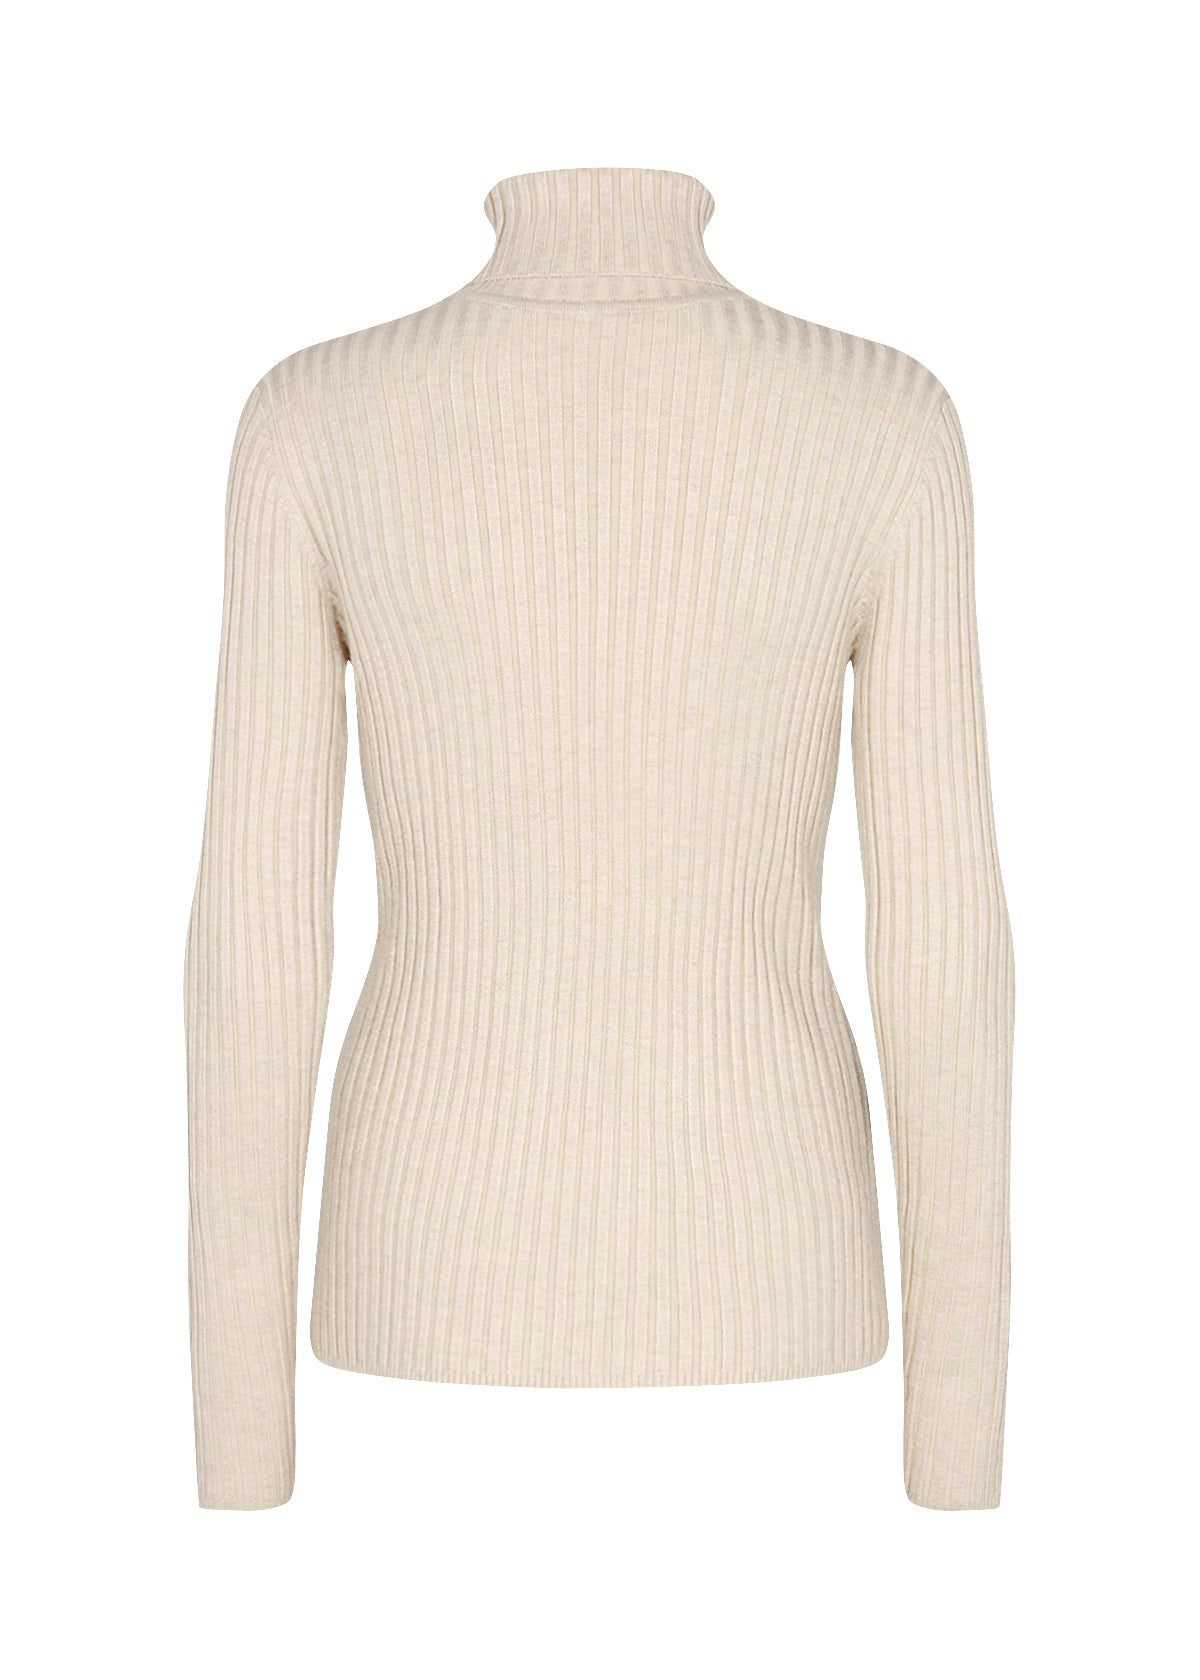 The Dollie Sweater in Cream